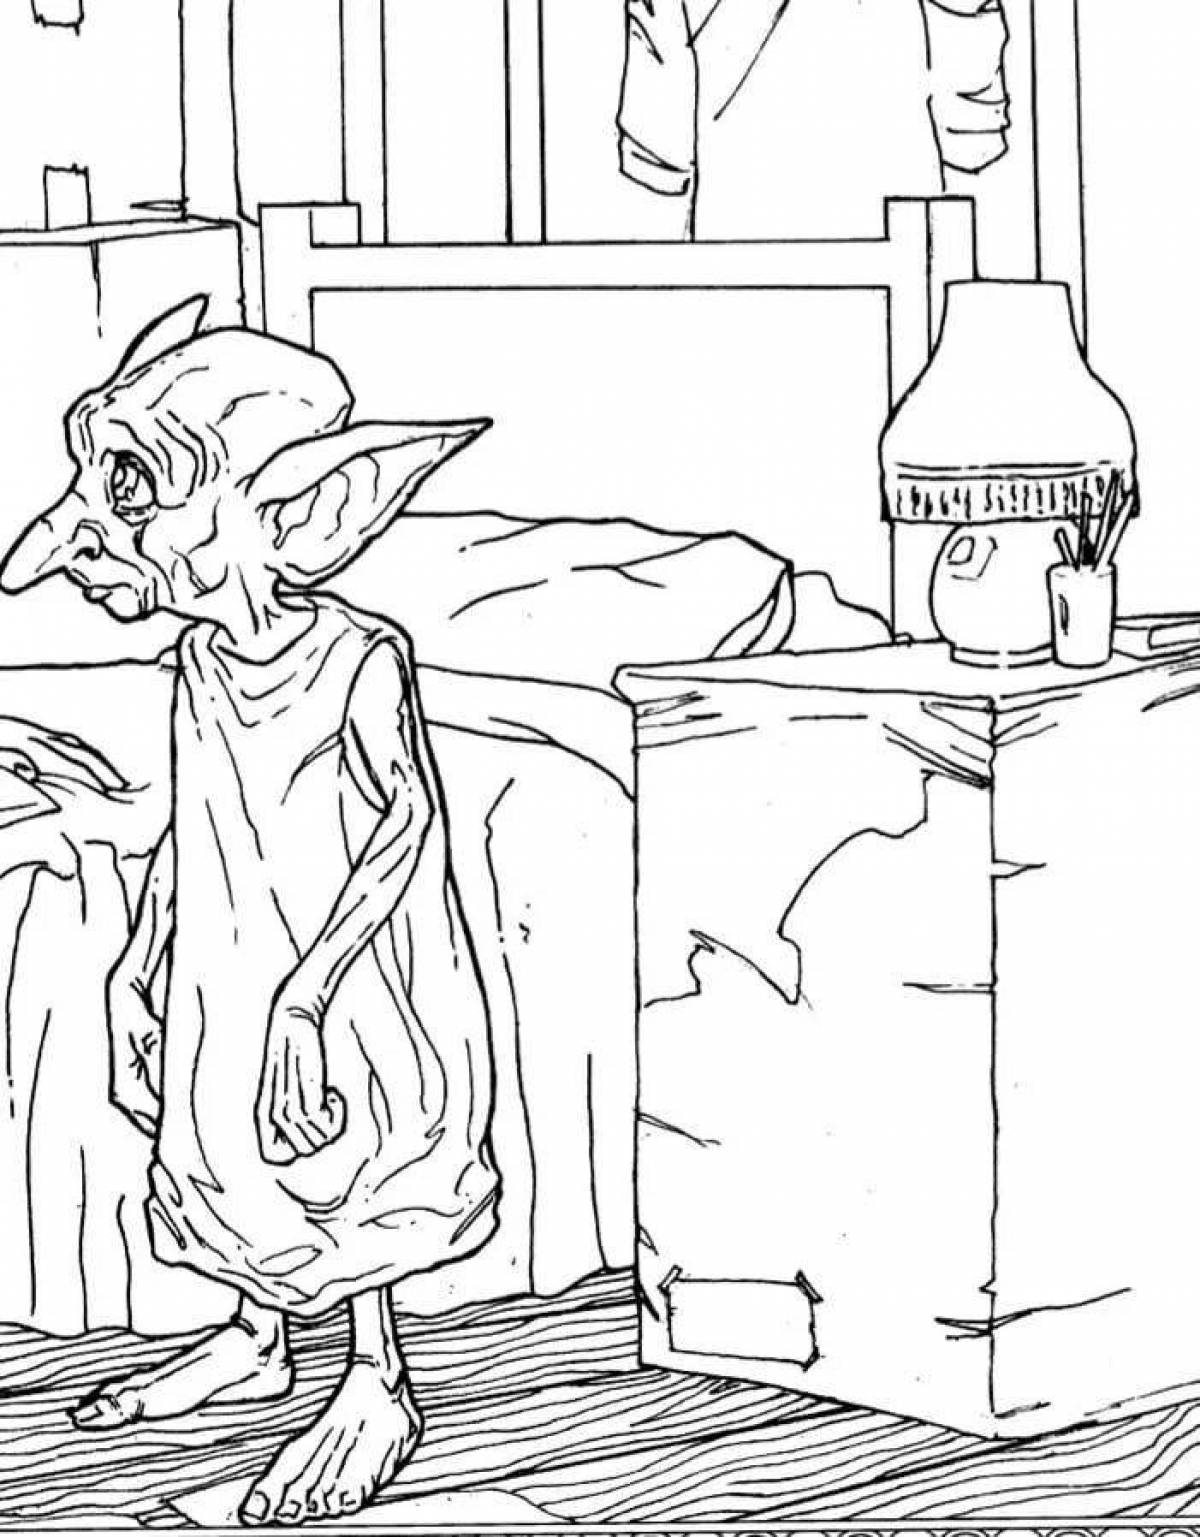 Colorful dobby coloring page